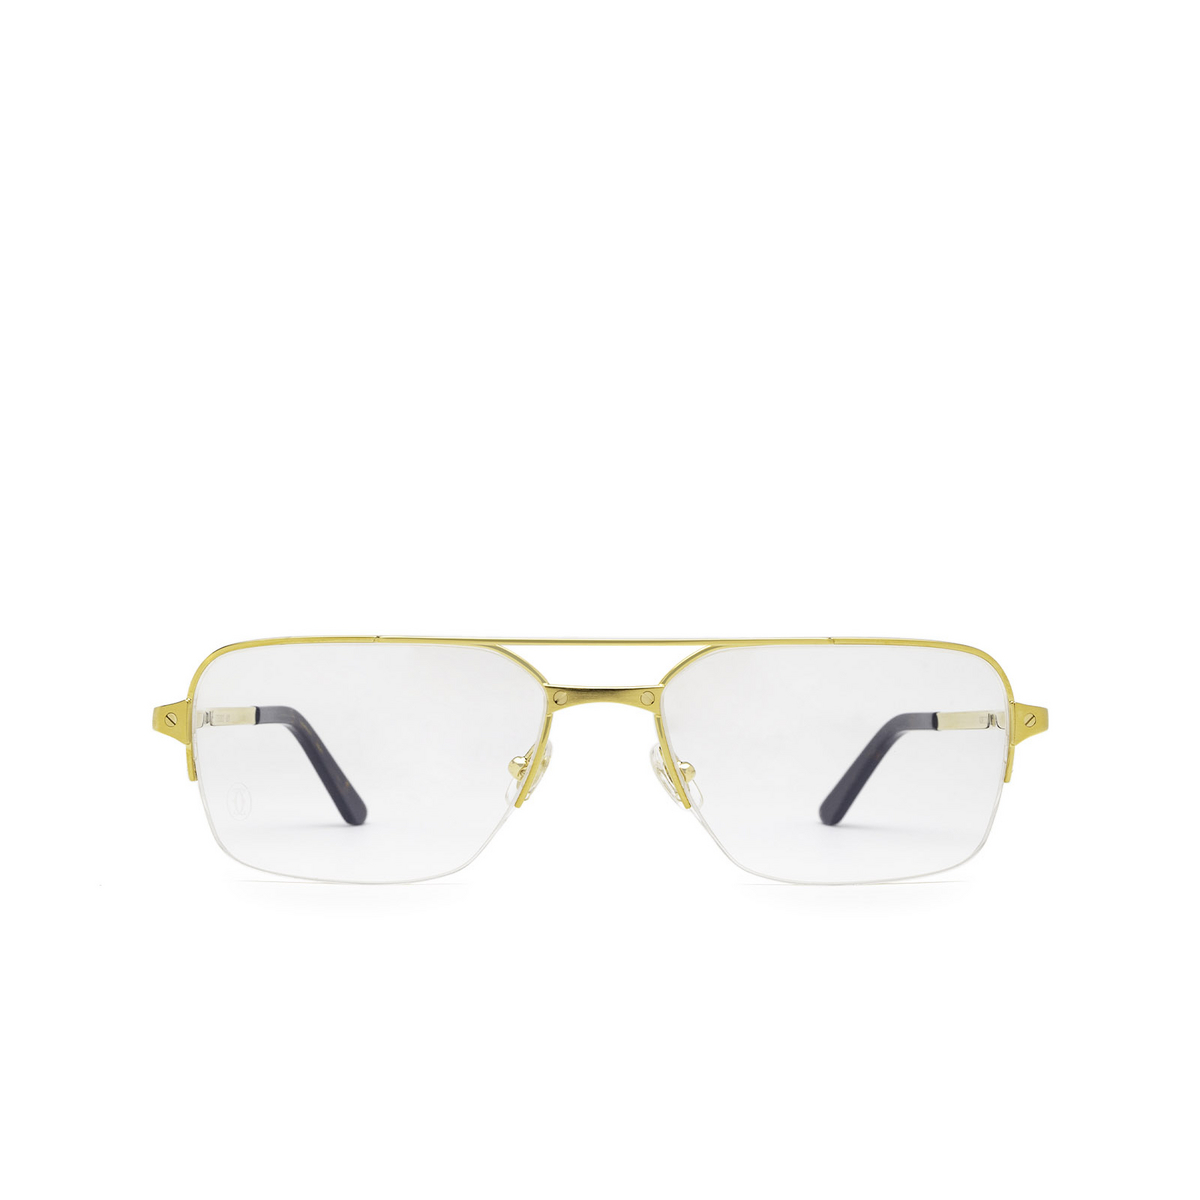 Cartier CT0308O Eyeglasses 001 Gold - front view